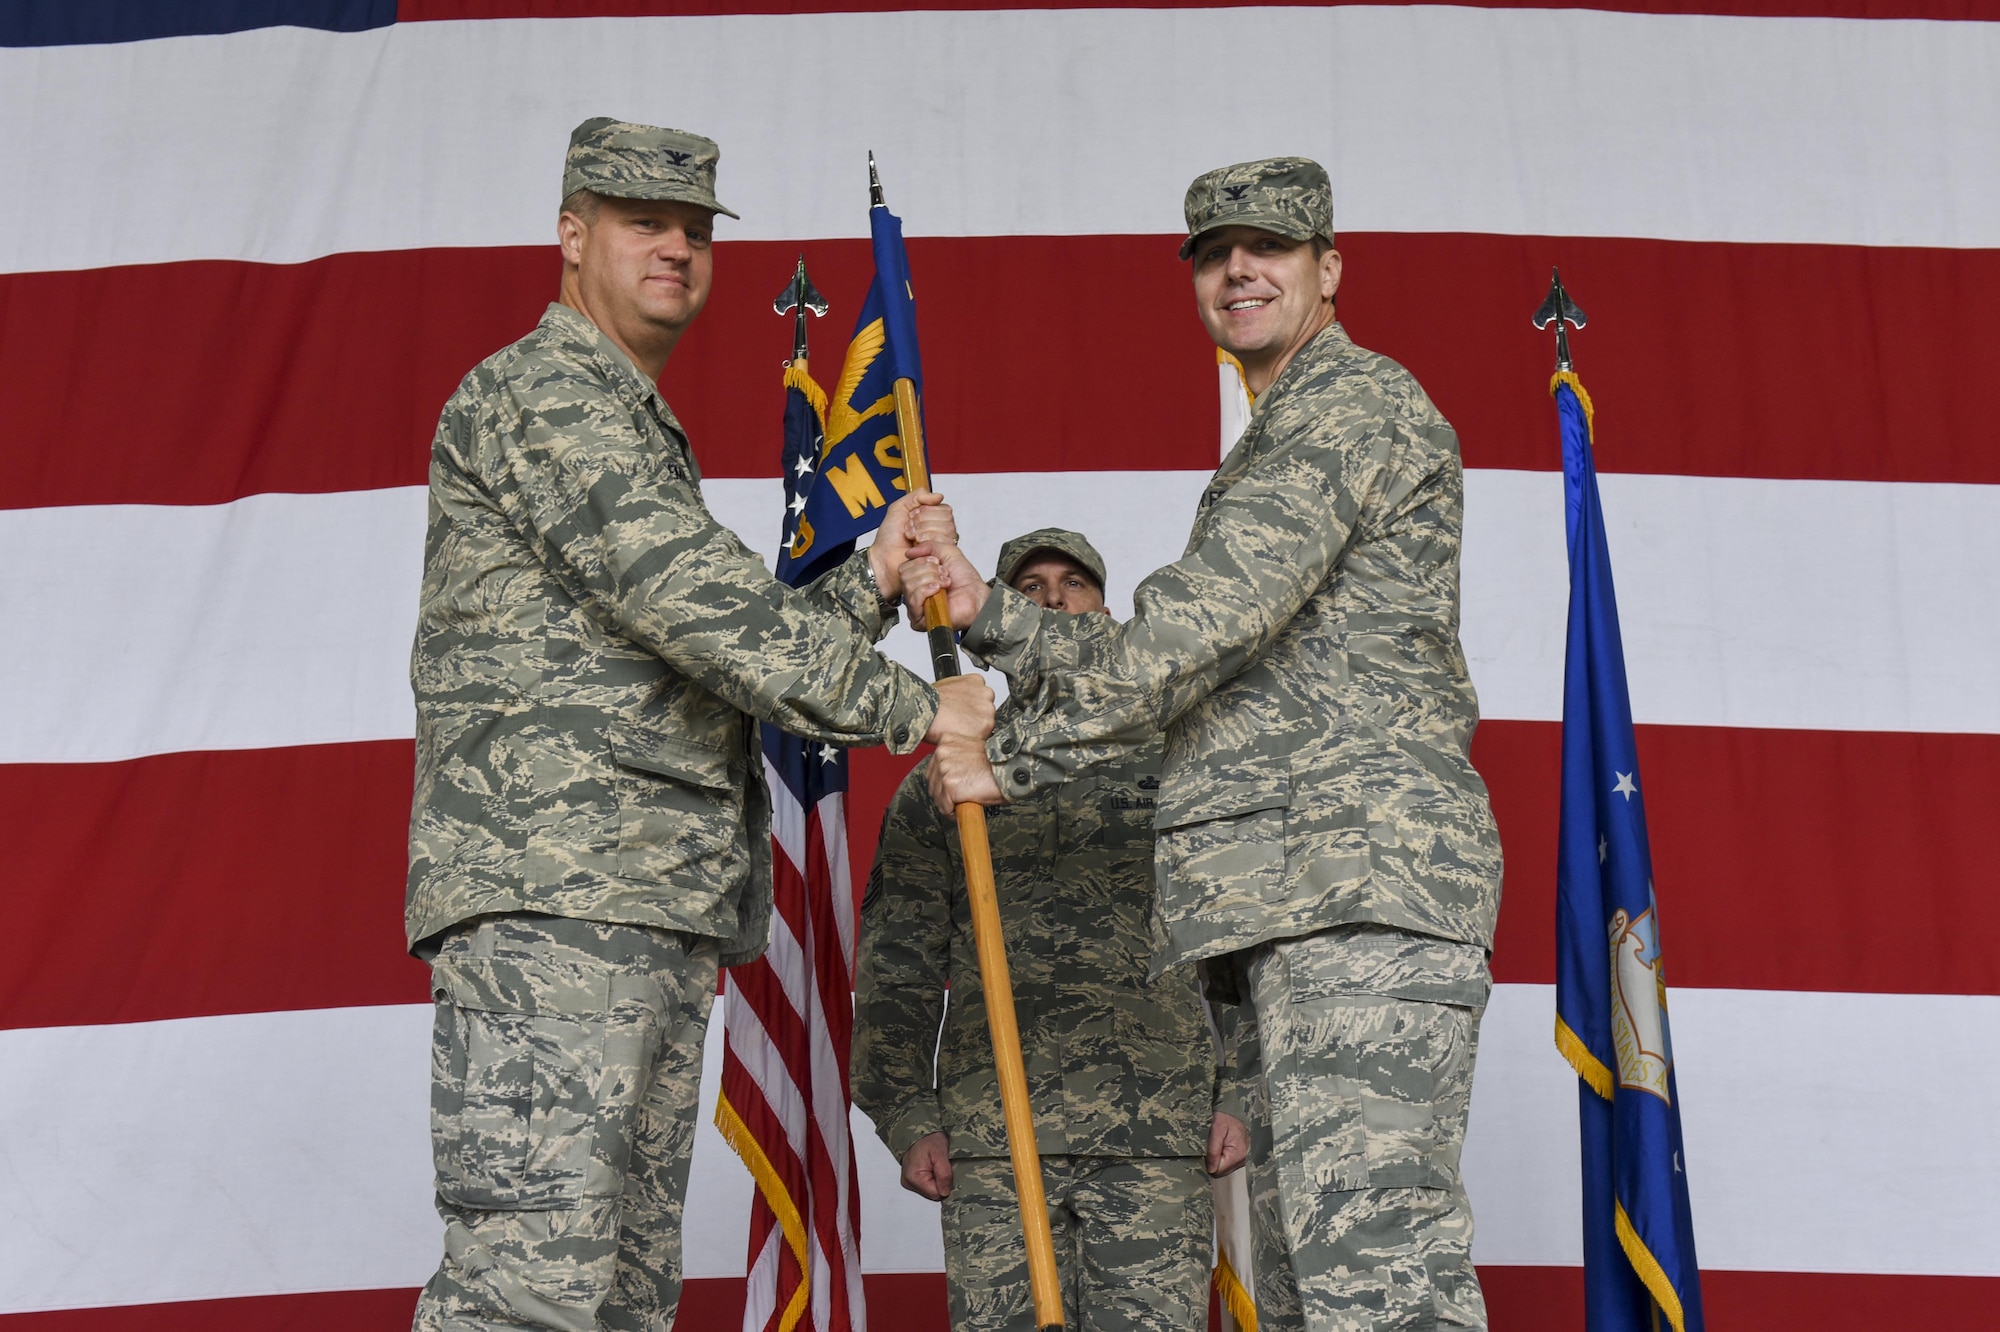 U.S. Air Force Col. Michael Zuhlsdorf, 8th Mission Support Group commander, receives the guidon from Col. David Shoemaker, 8th Fighter Wing commander, during a change of commander ceremony at Kunsan Air Base, Republic of Korea, June 8, 2017. Col. Shoemaker presided over the ceremony in which Col. Richard McKee relinquished command of the 8th MSG to Col. Michael Zuhlsdorf. (U.S. Air Force photo by Senior Airman Michael Hunsaker/Released)